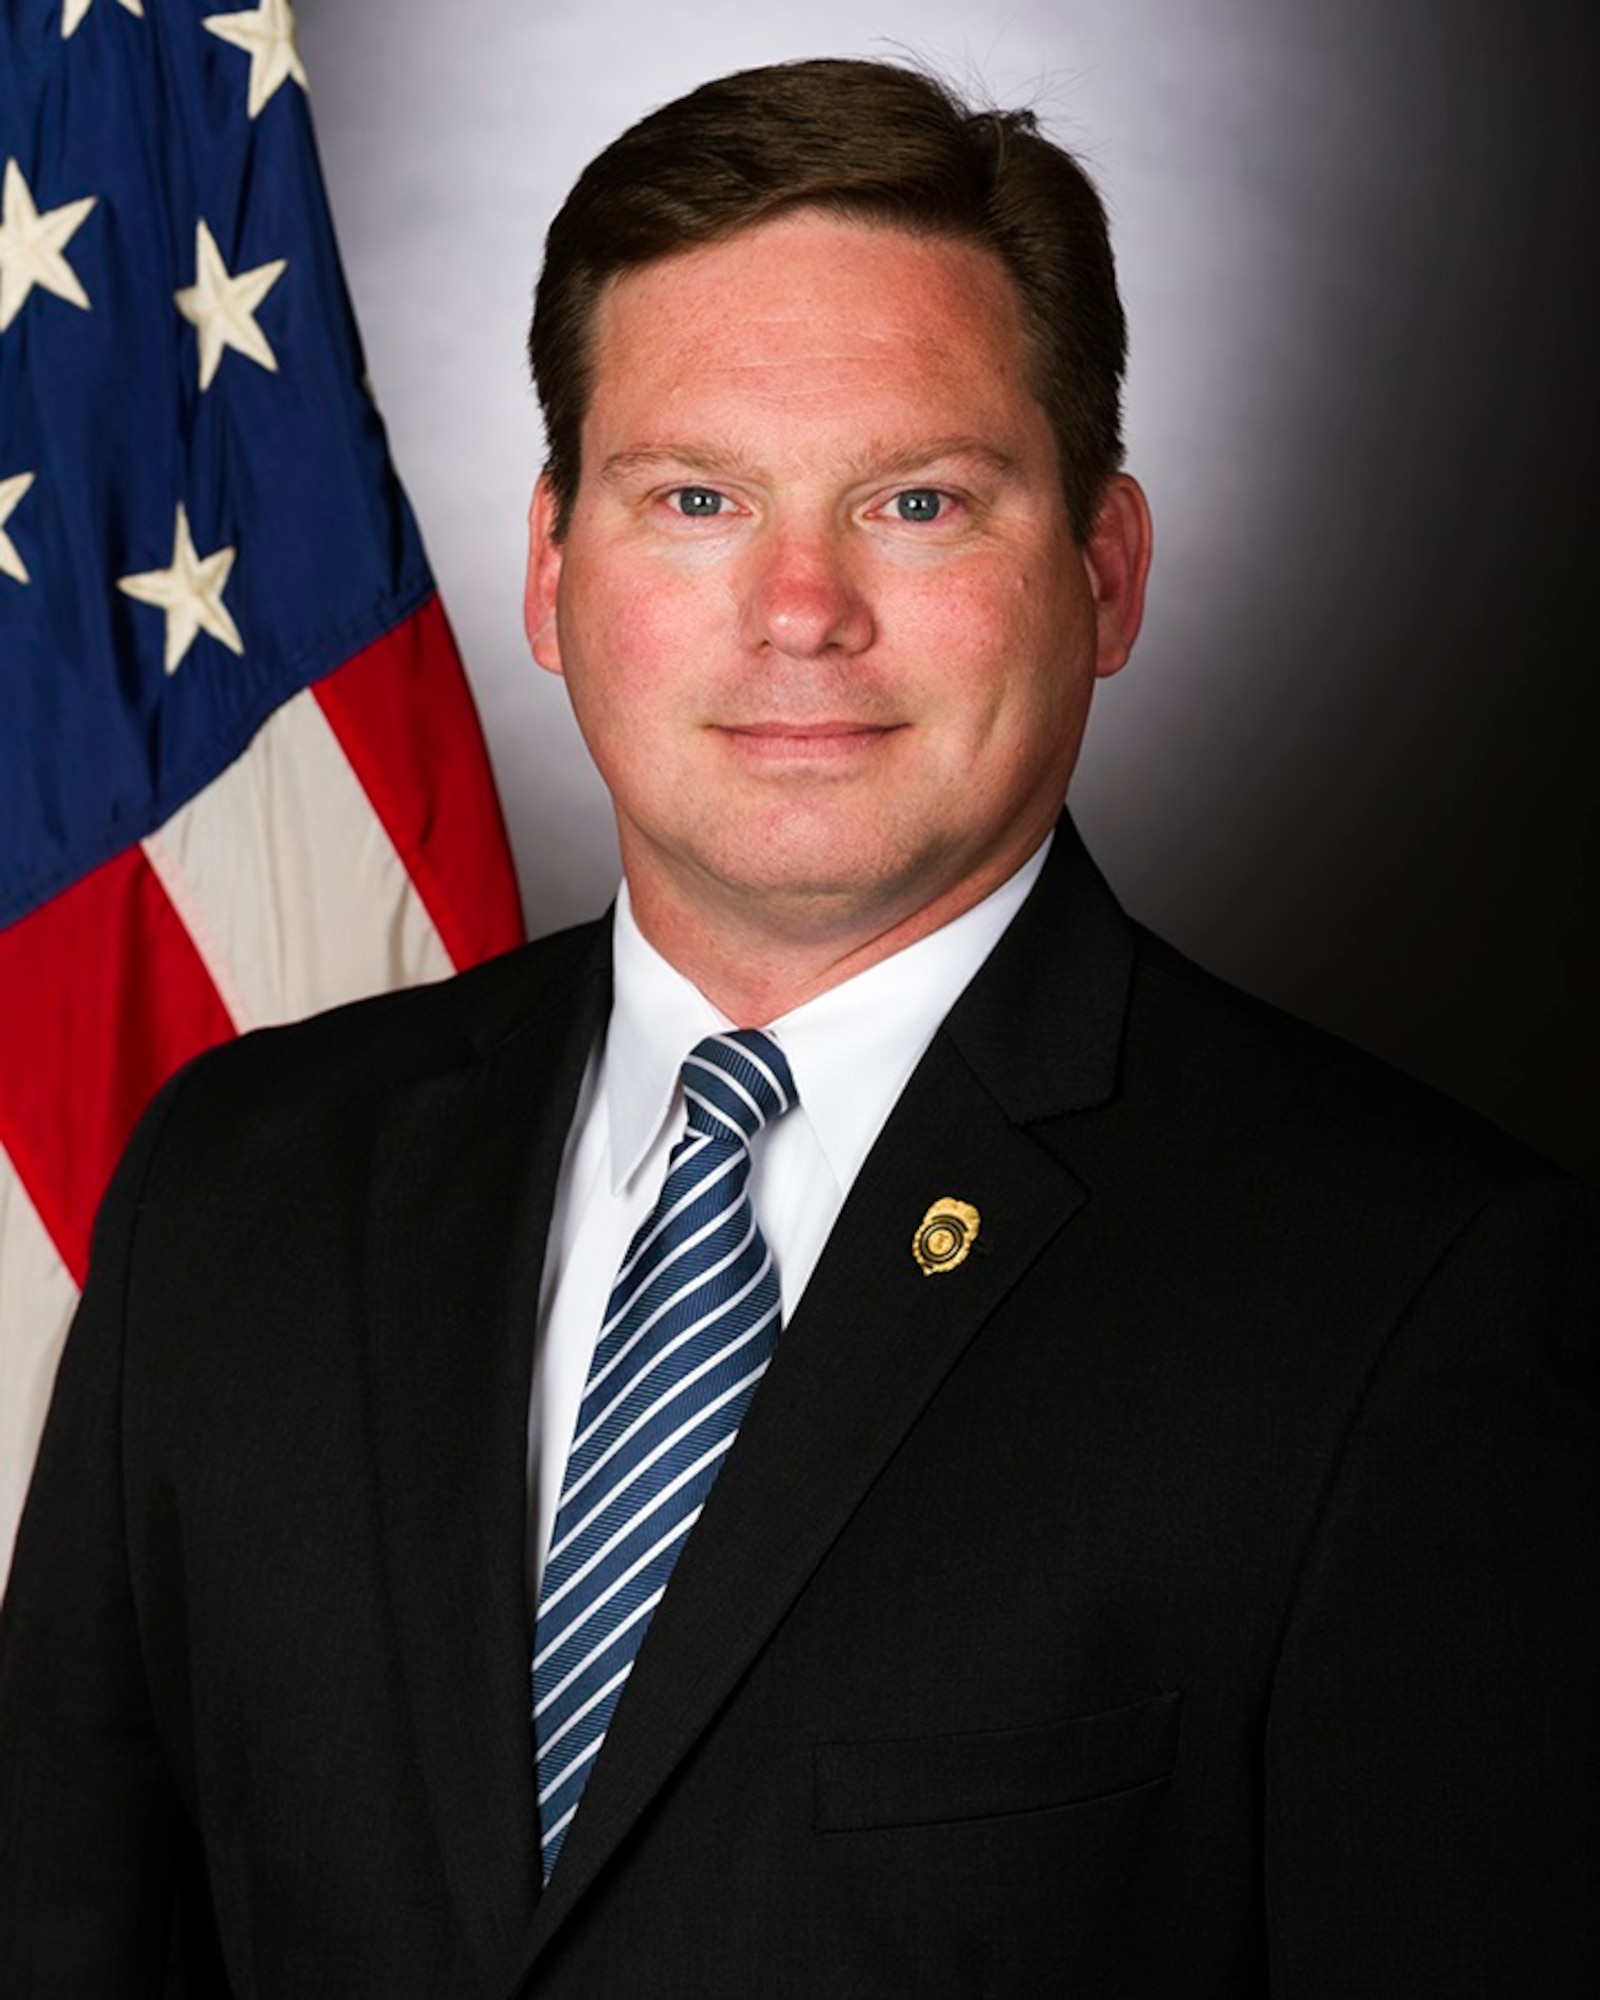 Mr. Terry Phillips, the Executive Director, Office of Special Projects (PJ) and United States Air Force and Space Force Special Access Program Security Director, has been appointed to the Senior Executive Service (SES), making him the first Executive Director of PJ to hold the rank of SES-1. (U.S. Air Force photo)